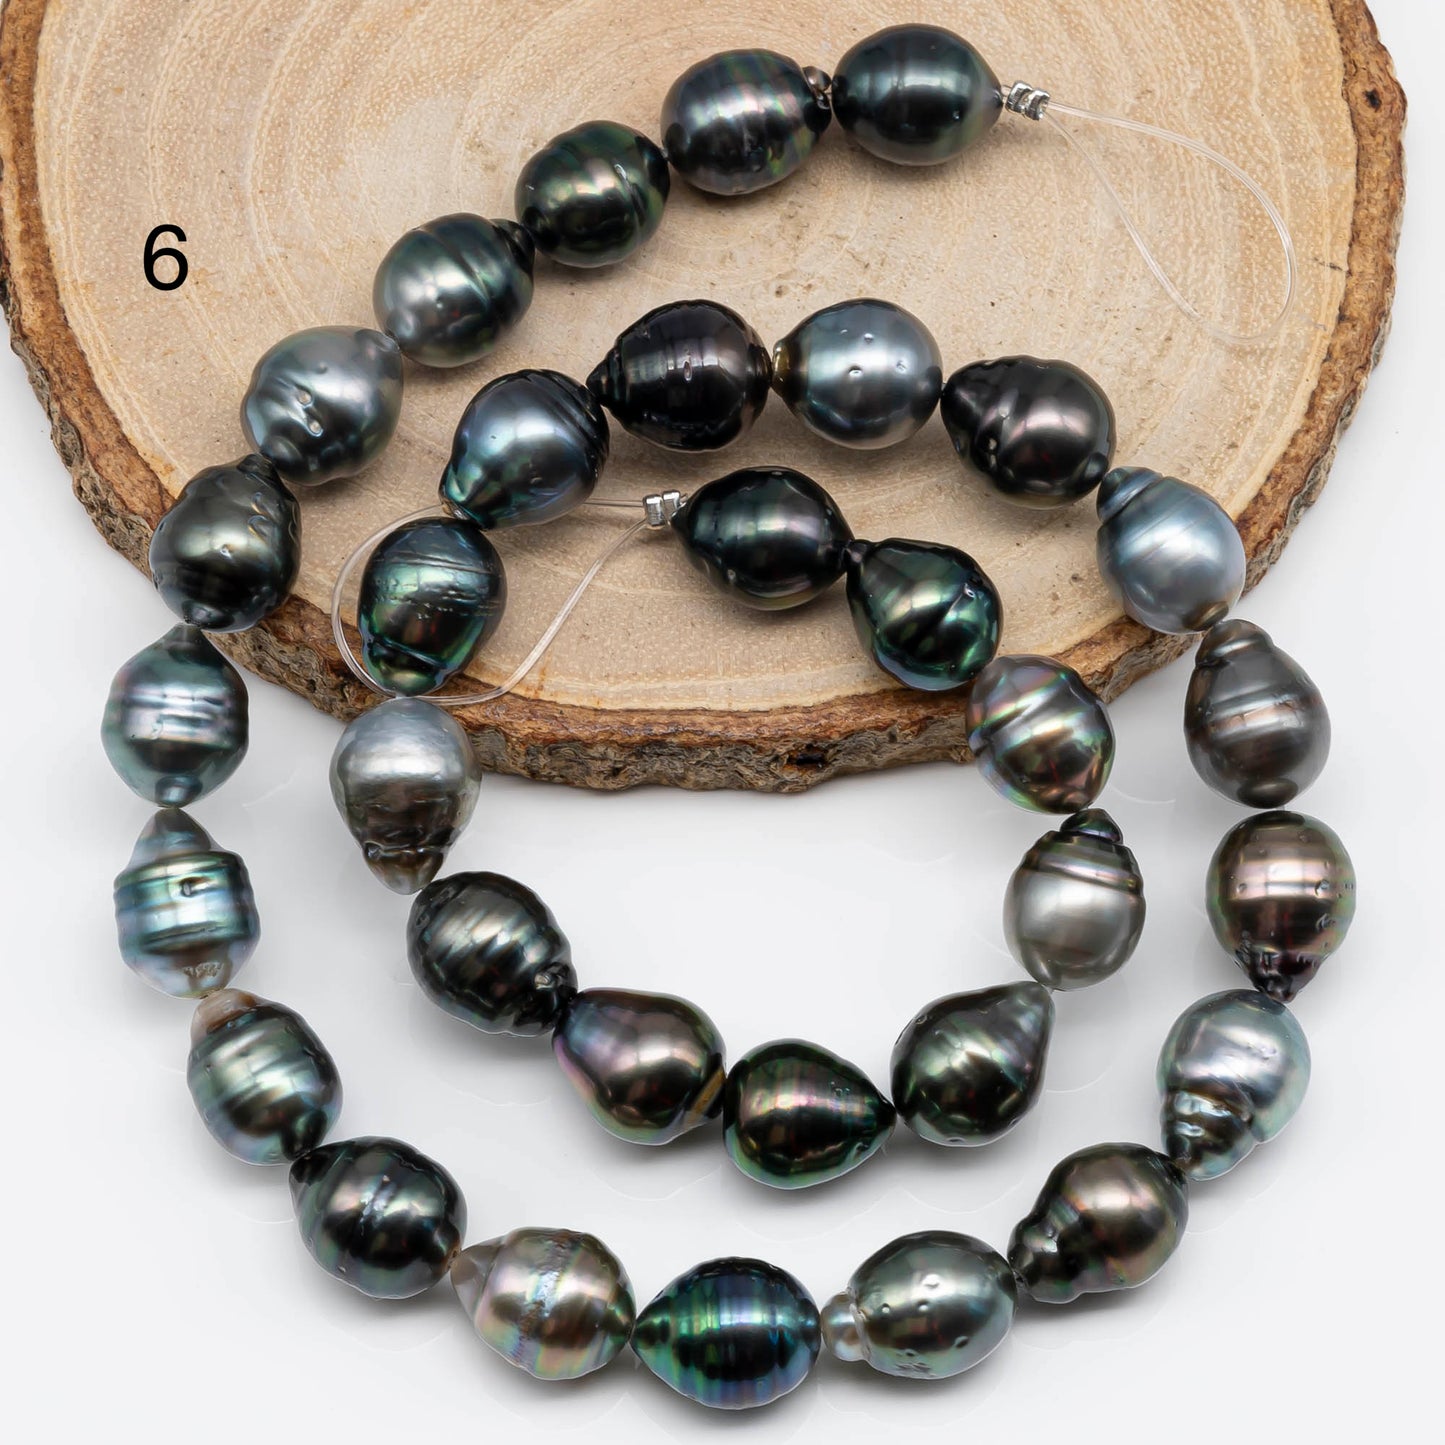 10-11mm Tahitian Pearl Drops with Natural Color and High Luster, Full Strand with Blemishes for Jewelry Making, SKU # 1718TH